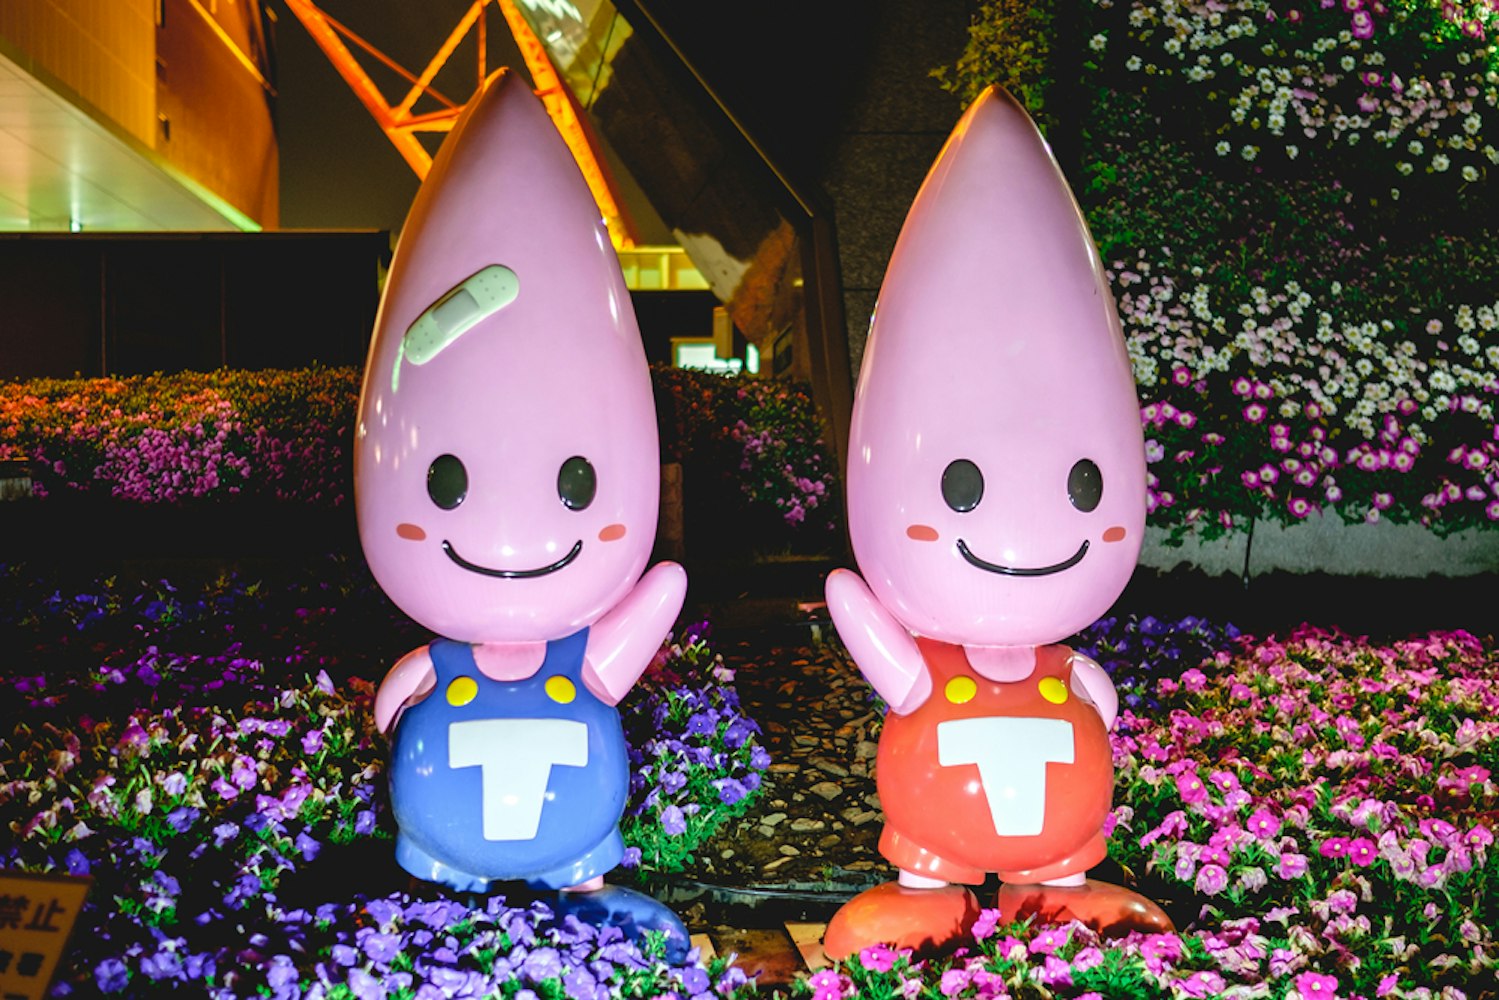 Tokyo Tower mascots, Noppon Brothers